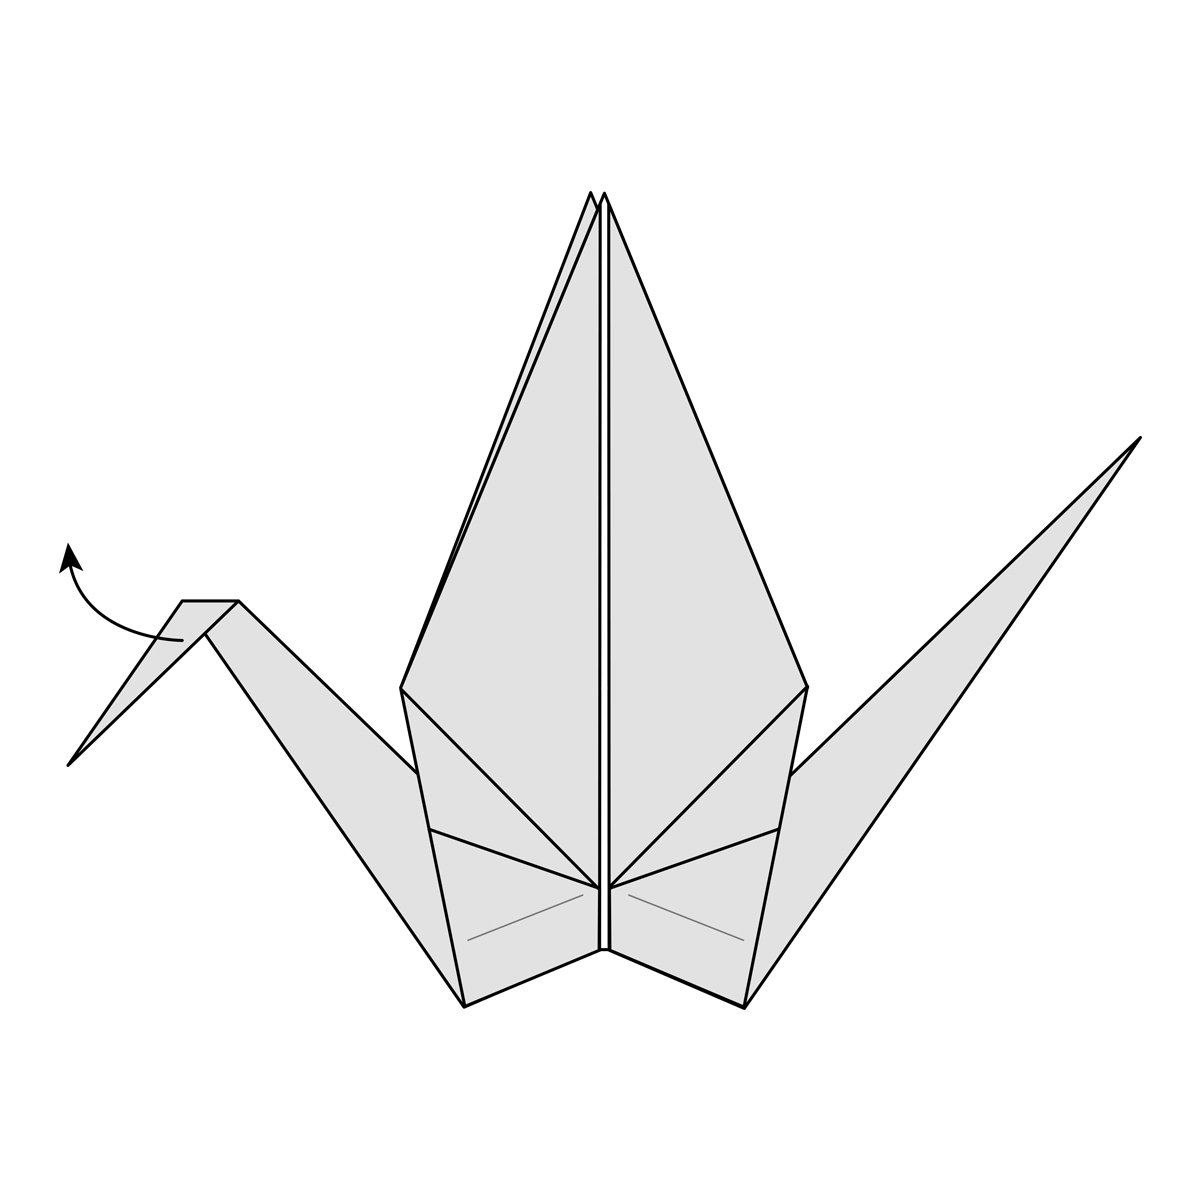 Origami Crane Step By Step Instructions Origami Crane How To Fold A Traditional Paper Crane